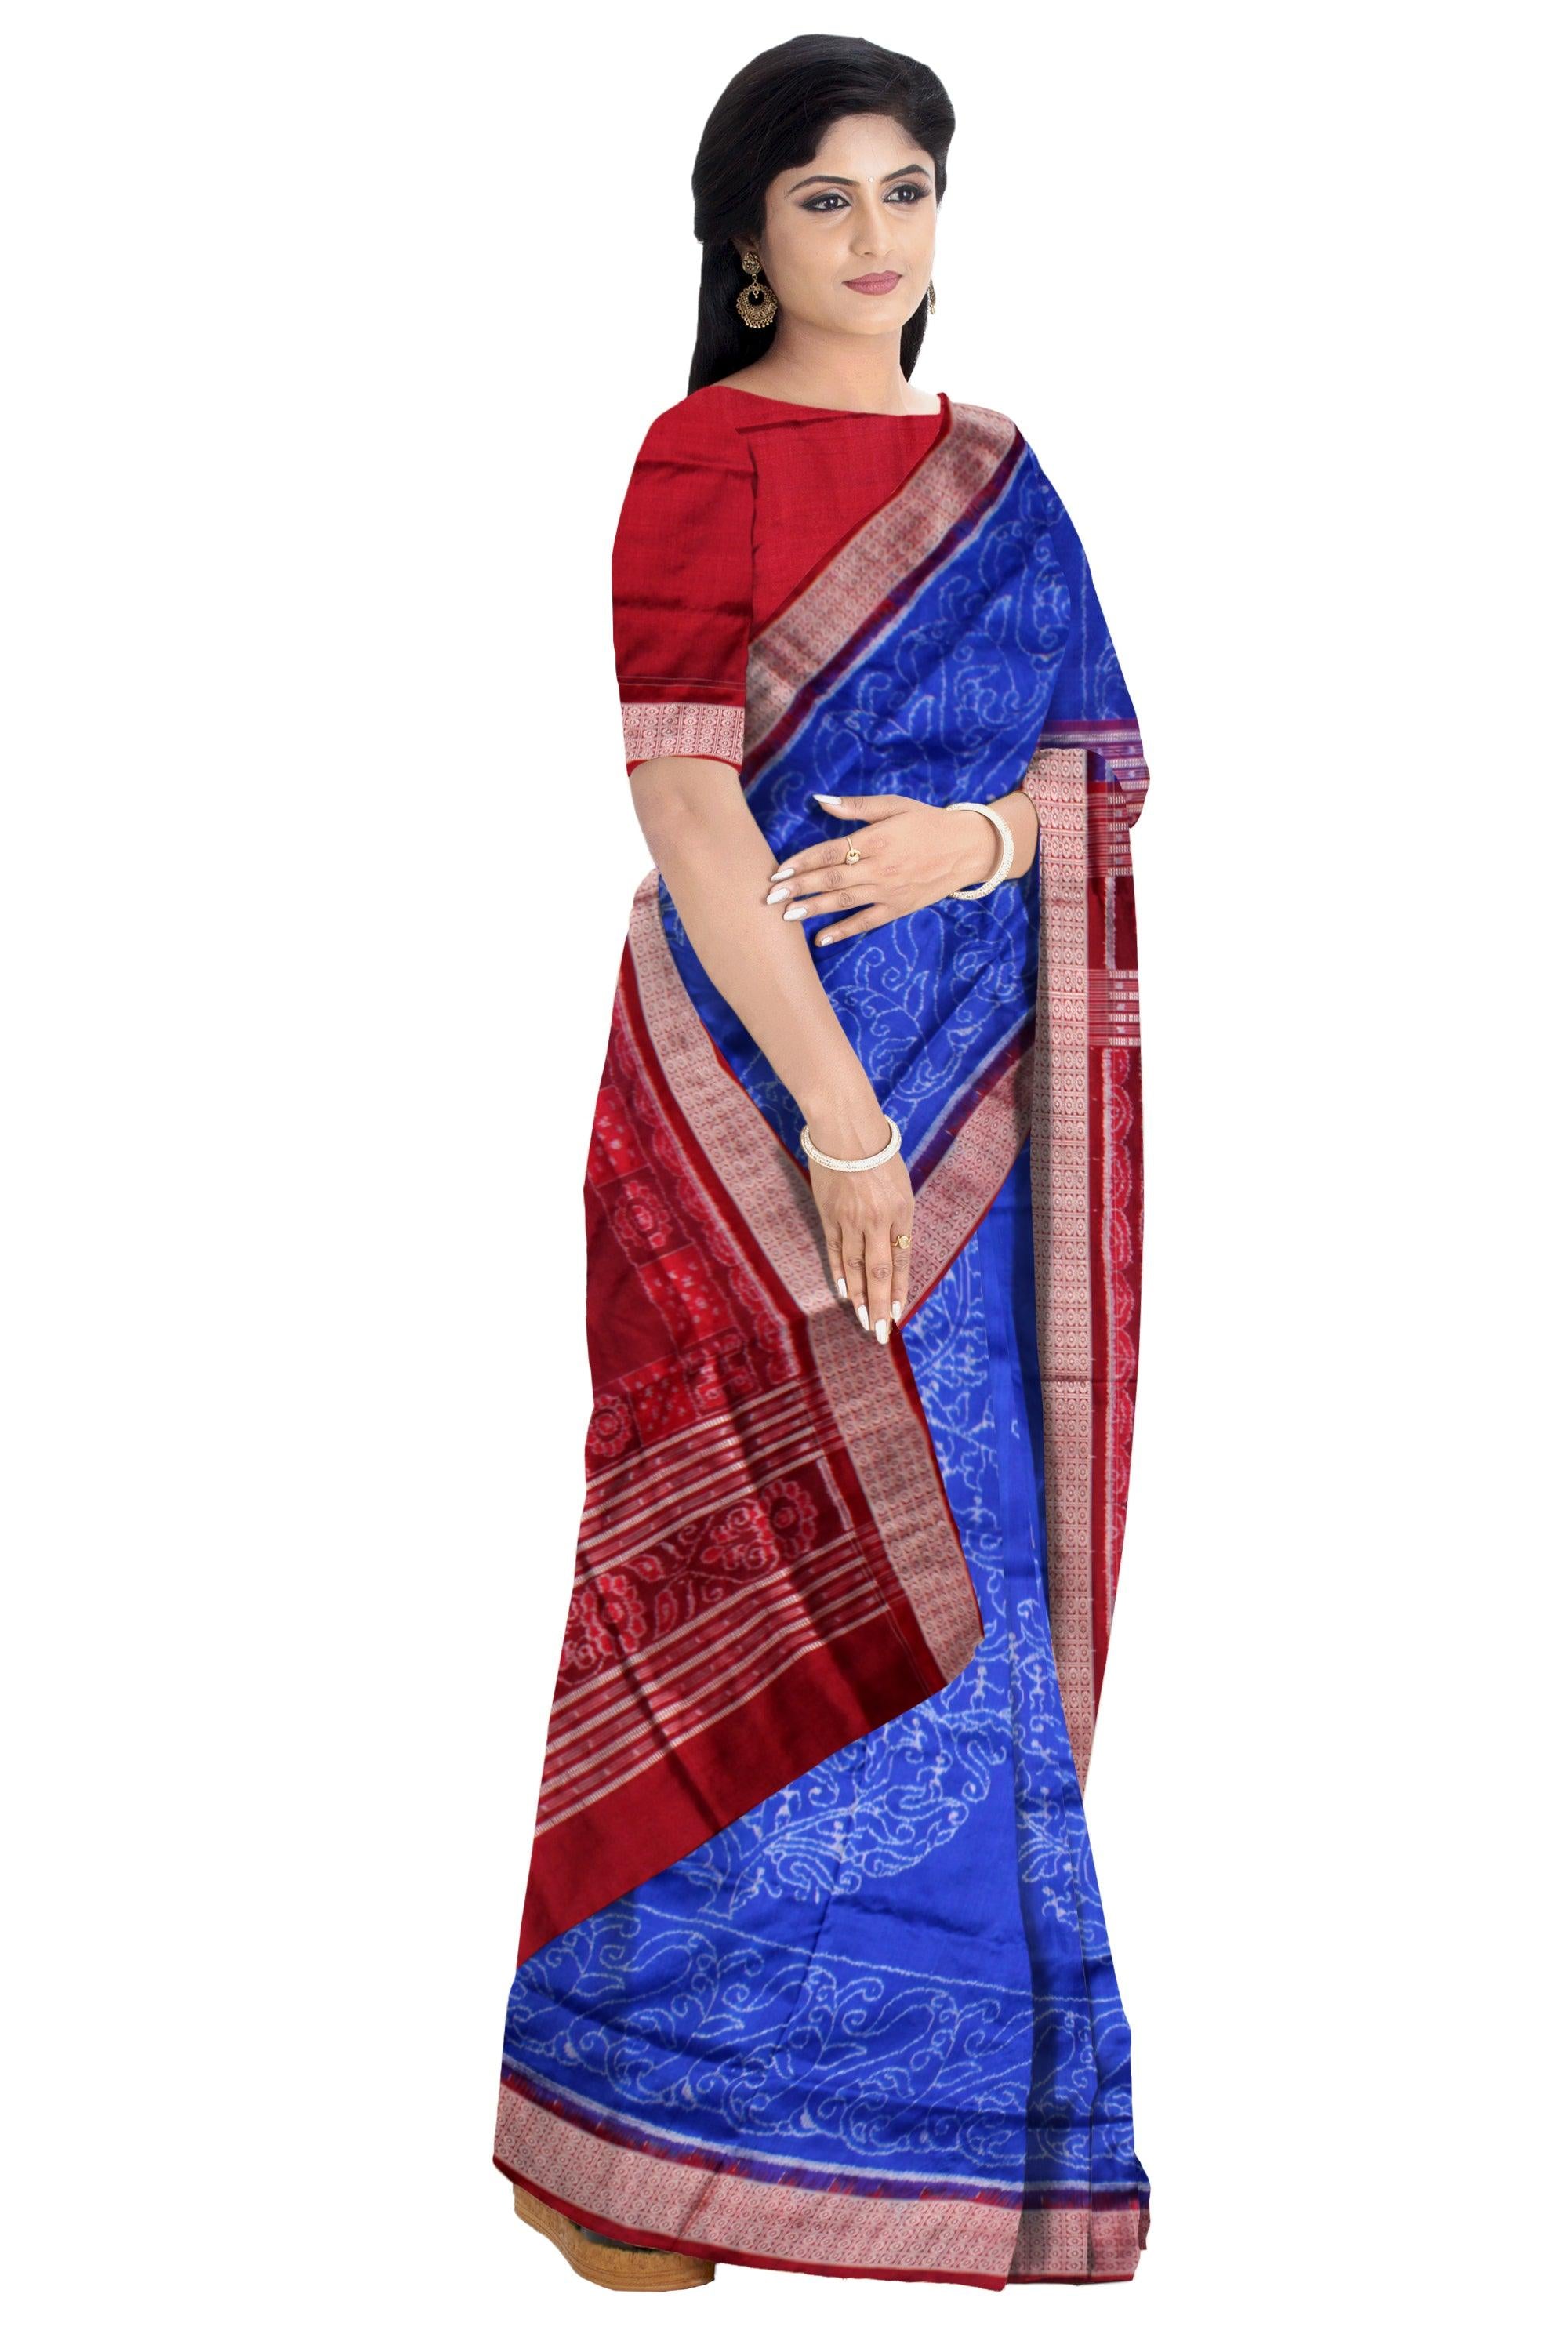 TERRACOTTA WITH TREE PATTERN PURE SILK SAREE IS BLUE AND MAROON COLOR BASE, COMES WITH MATCHING BLOUSE PIECE. - Koshali Arts & Crafts Enterprise